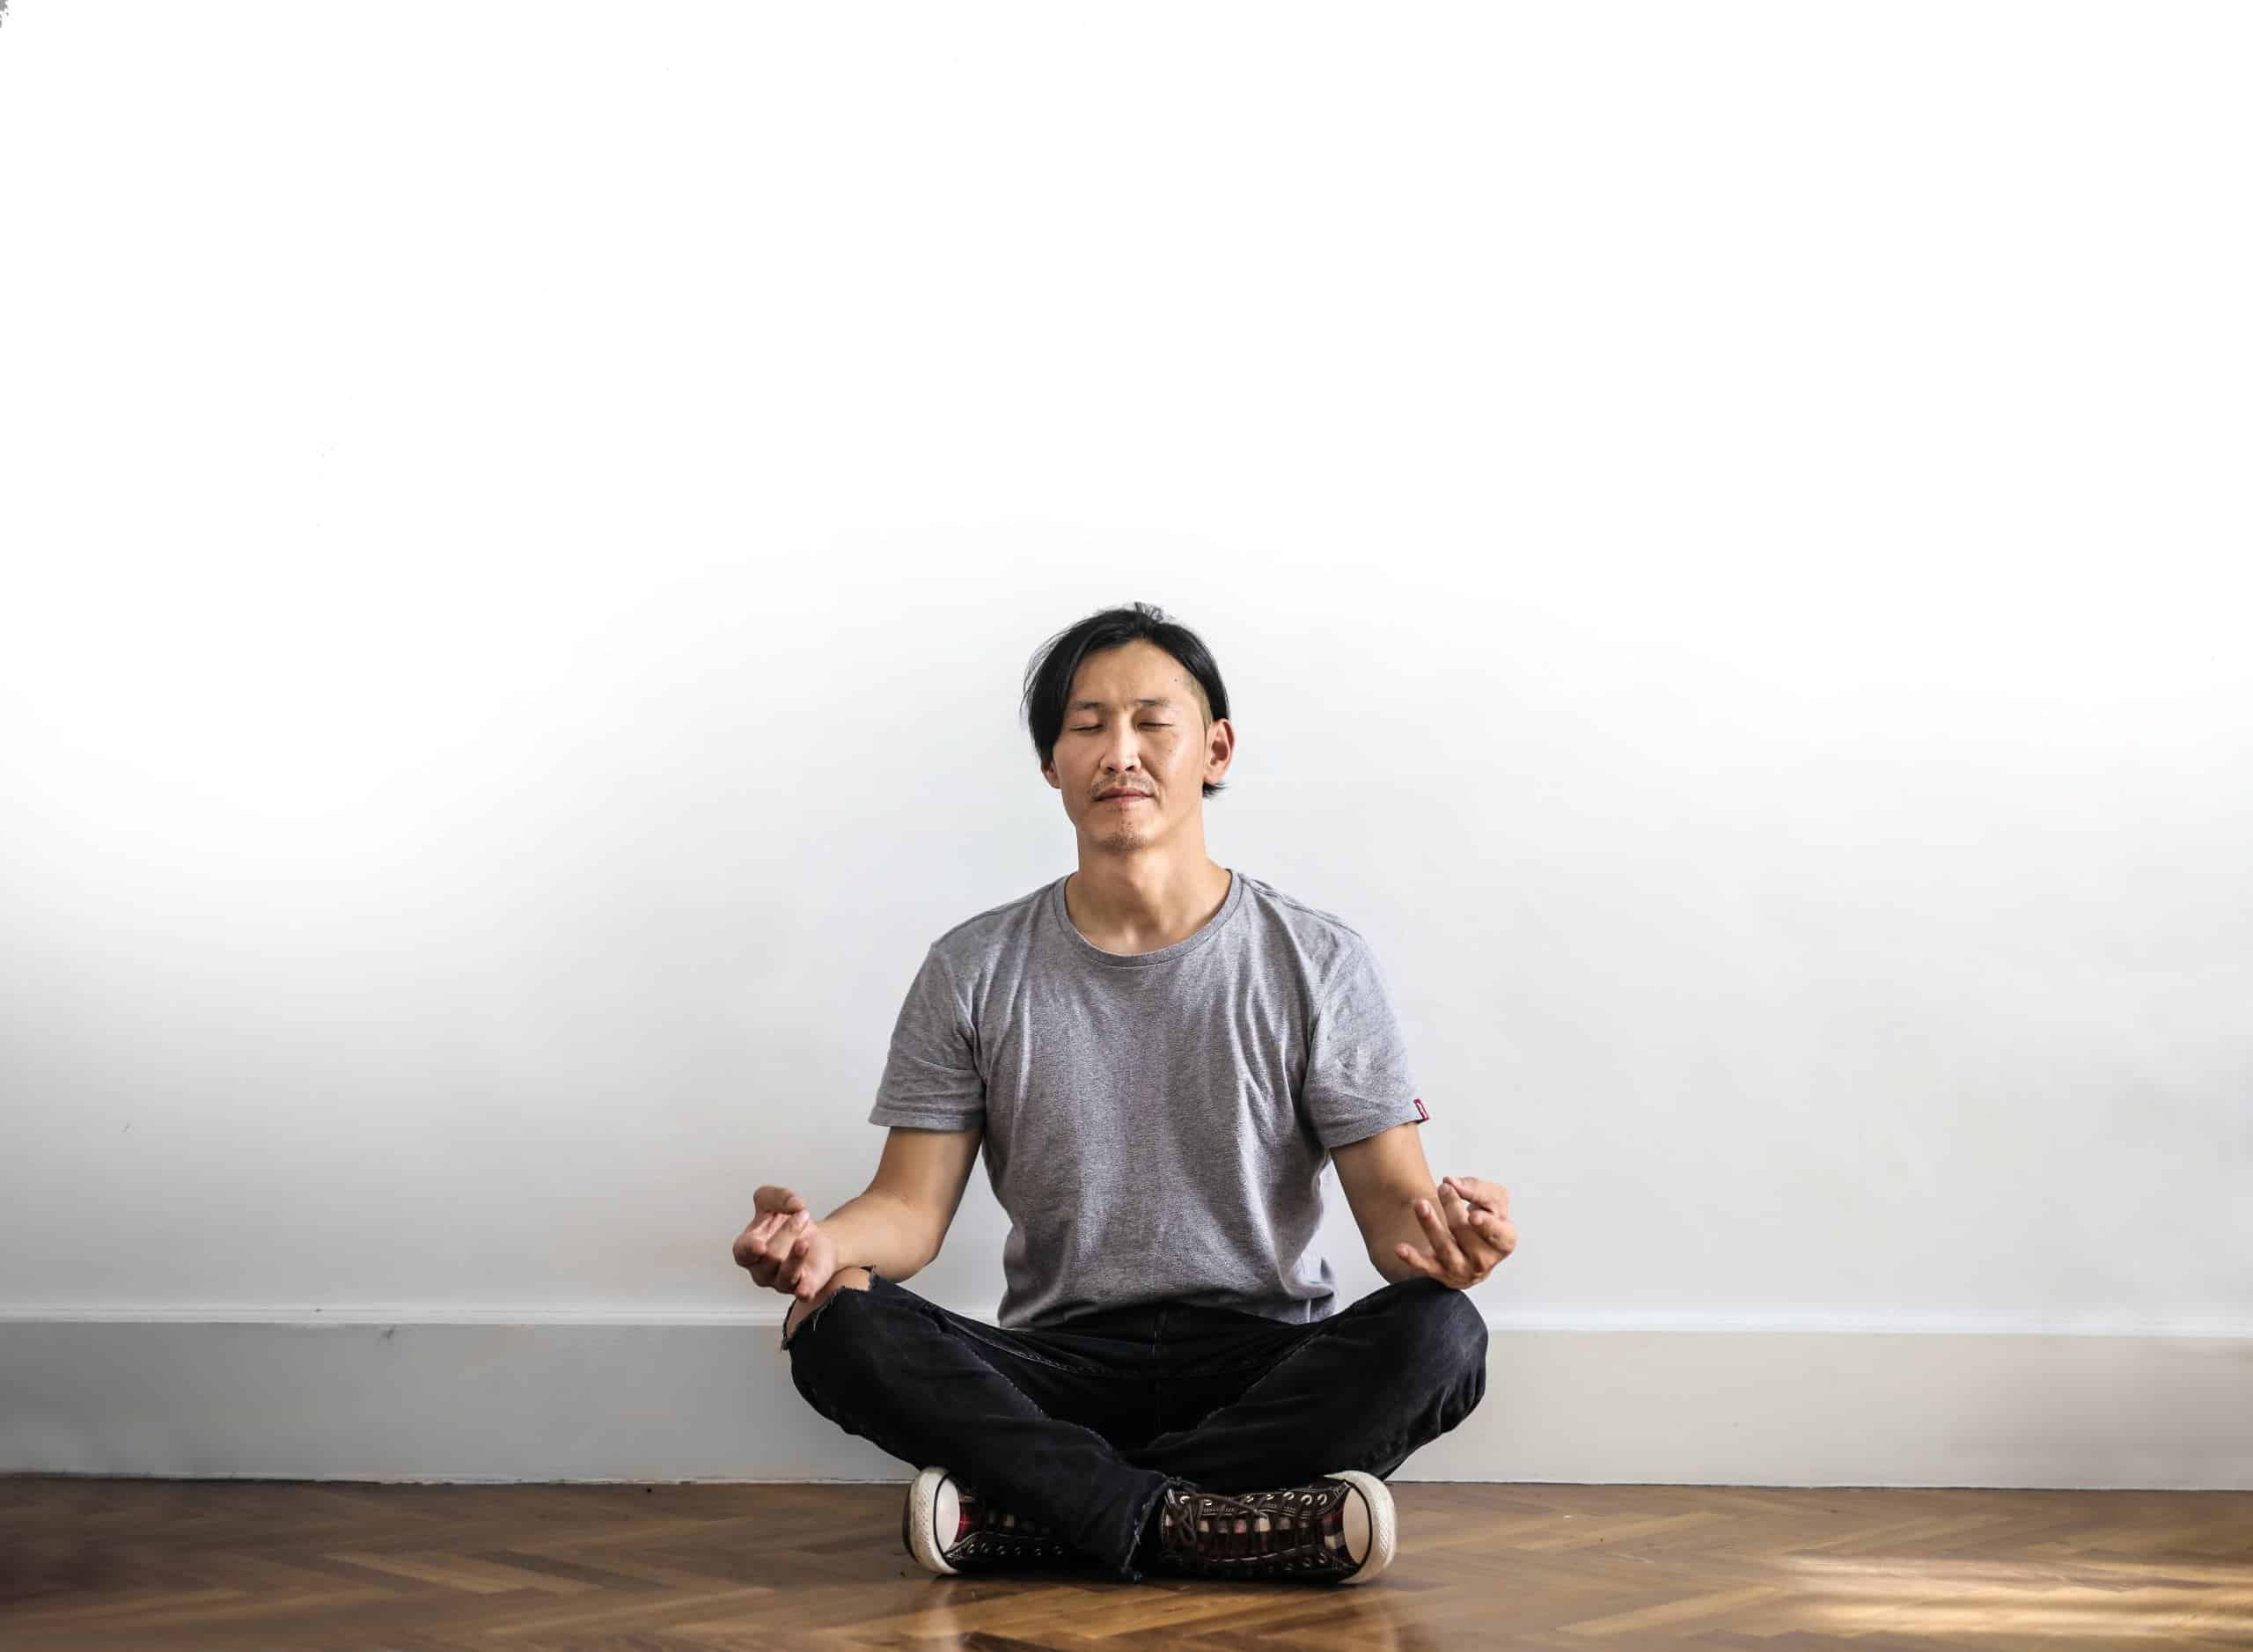 How To Bring More Mindfulness To Your Daily Life